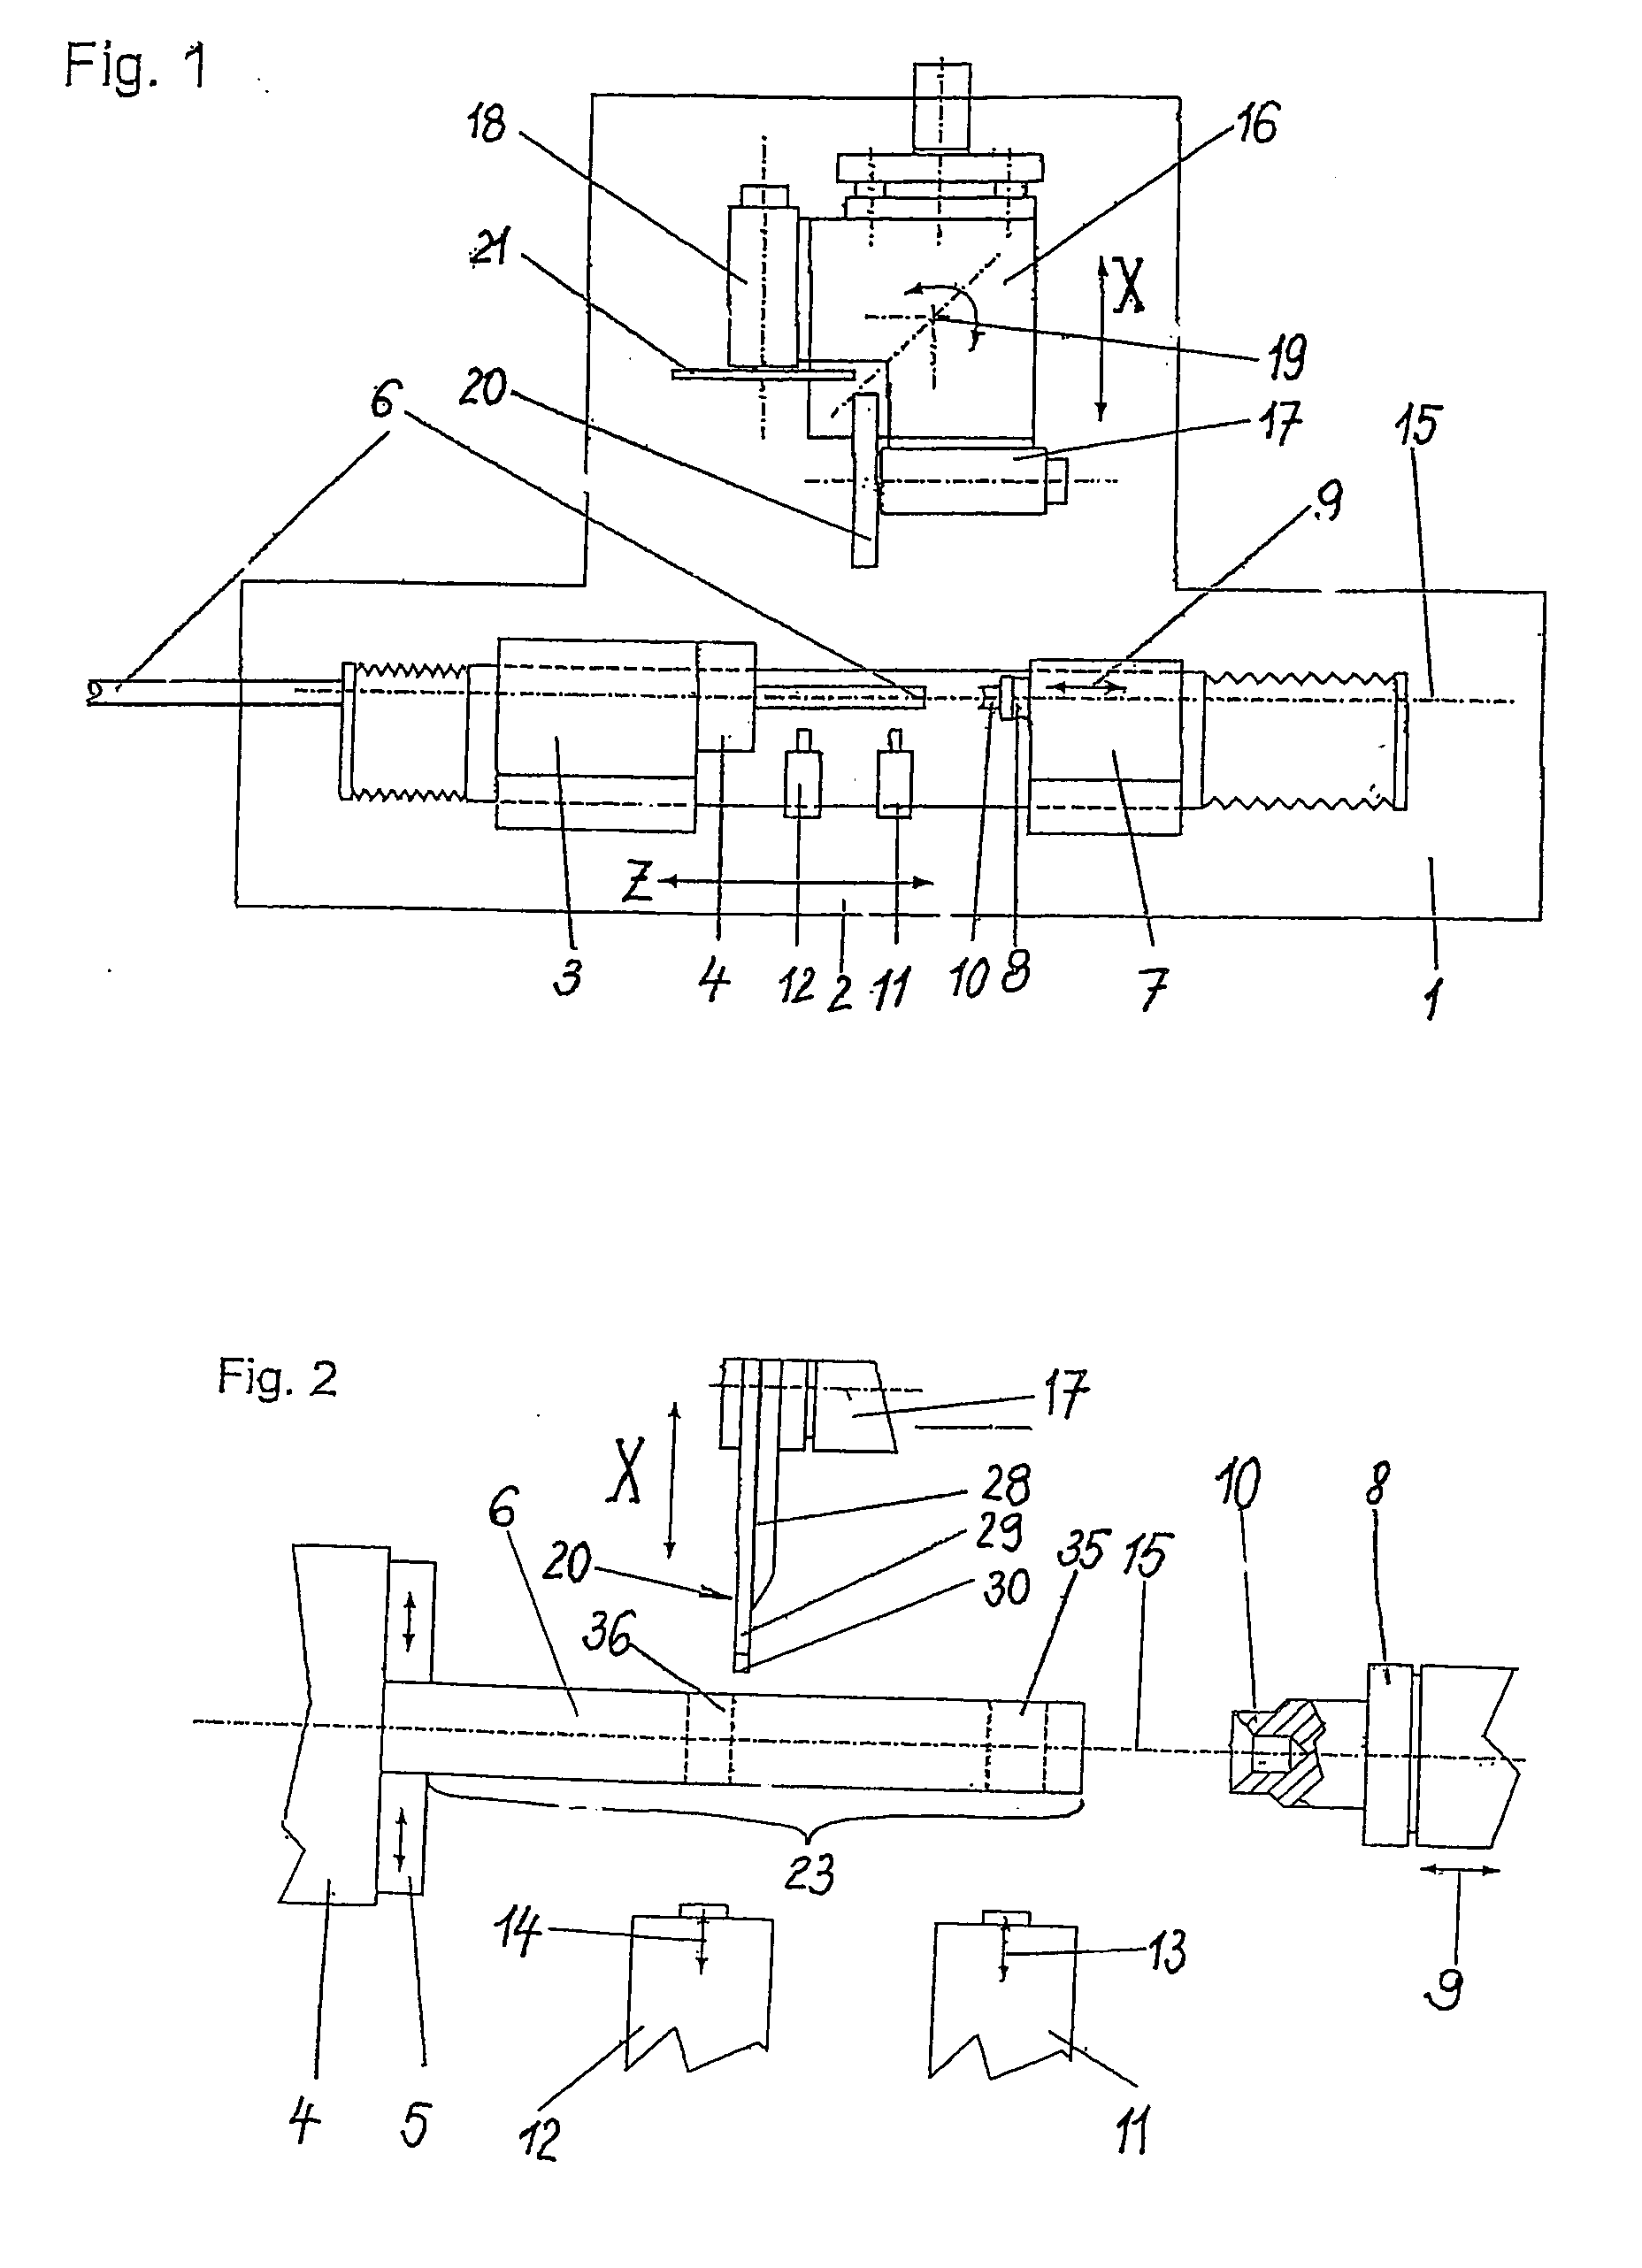 Cylindrical grinding method for producing hard metal tools and cylindrical grinding machine for grinding cylindrical starting bodies during the production of hard metal tools